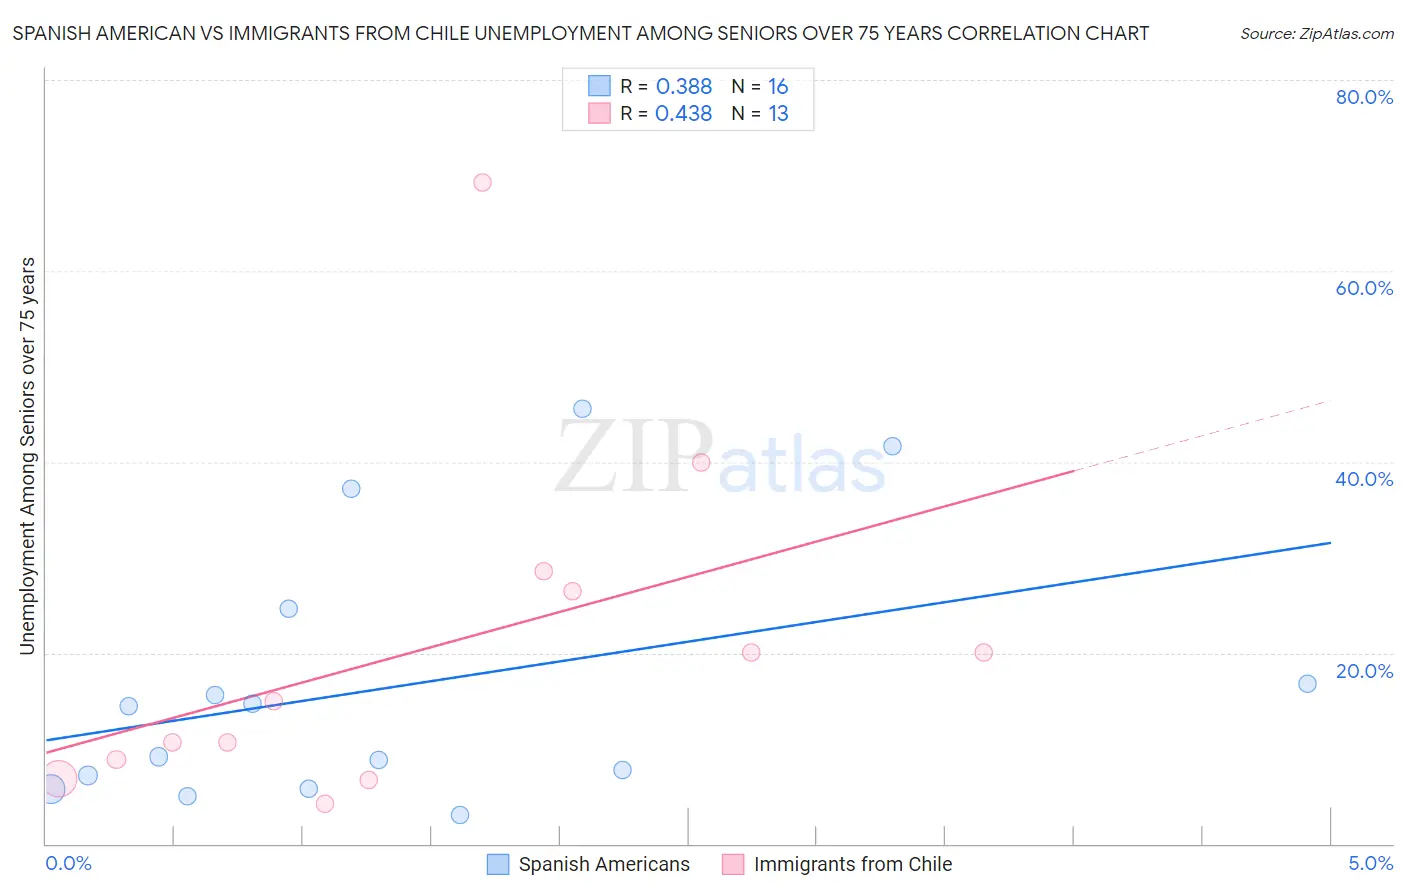 Spanish American vs Immigrants from Chile Unemployment Among Seniors over 75 years